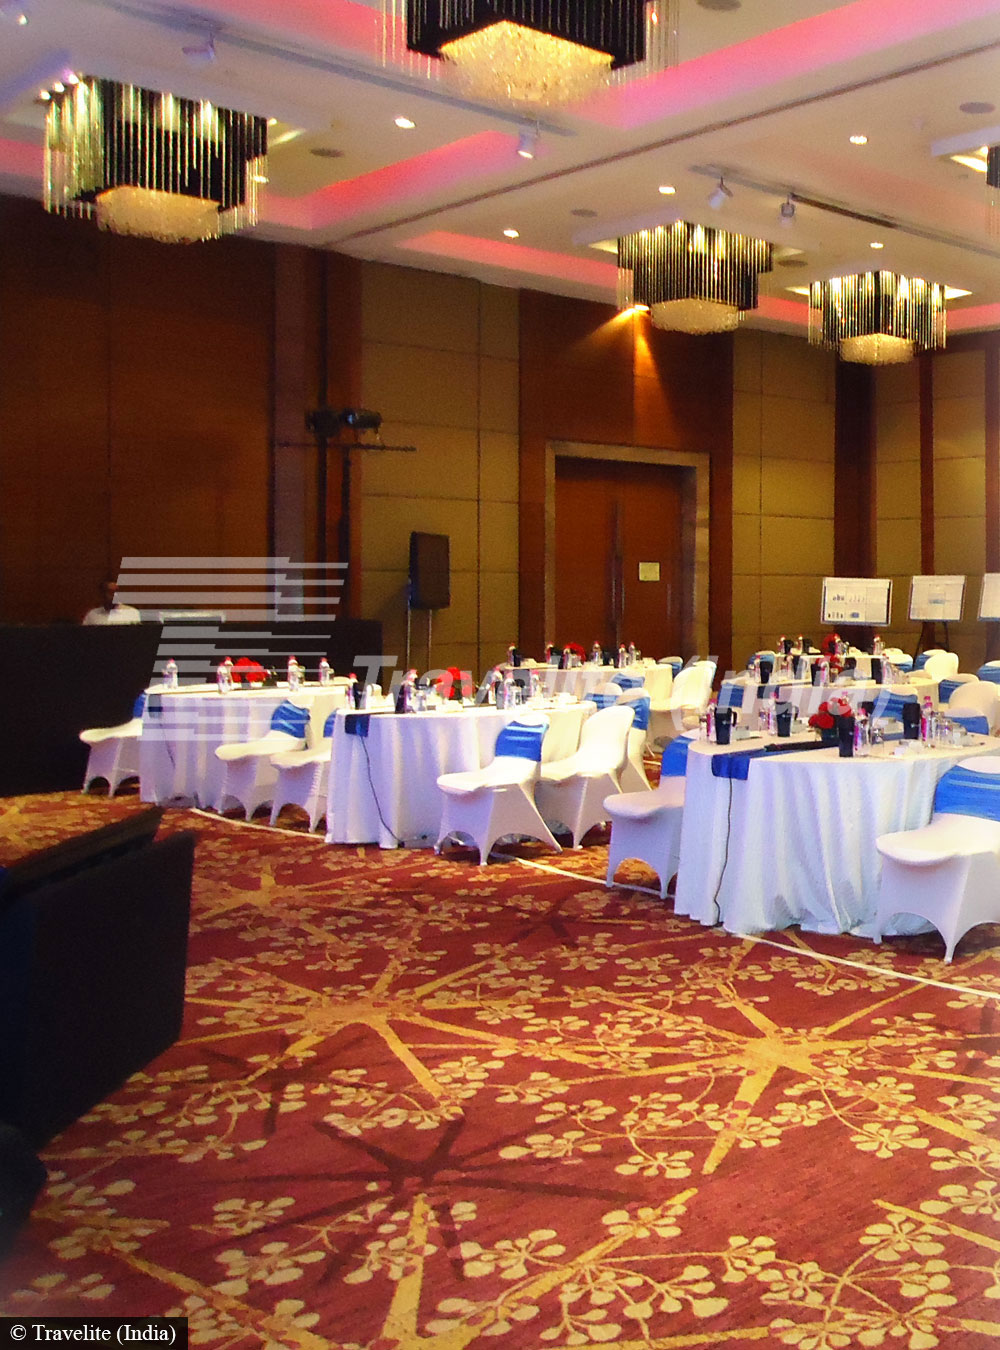 Conference room in Crowne plaza, Gurgaon pic-03